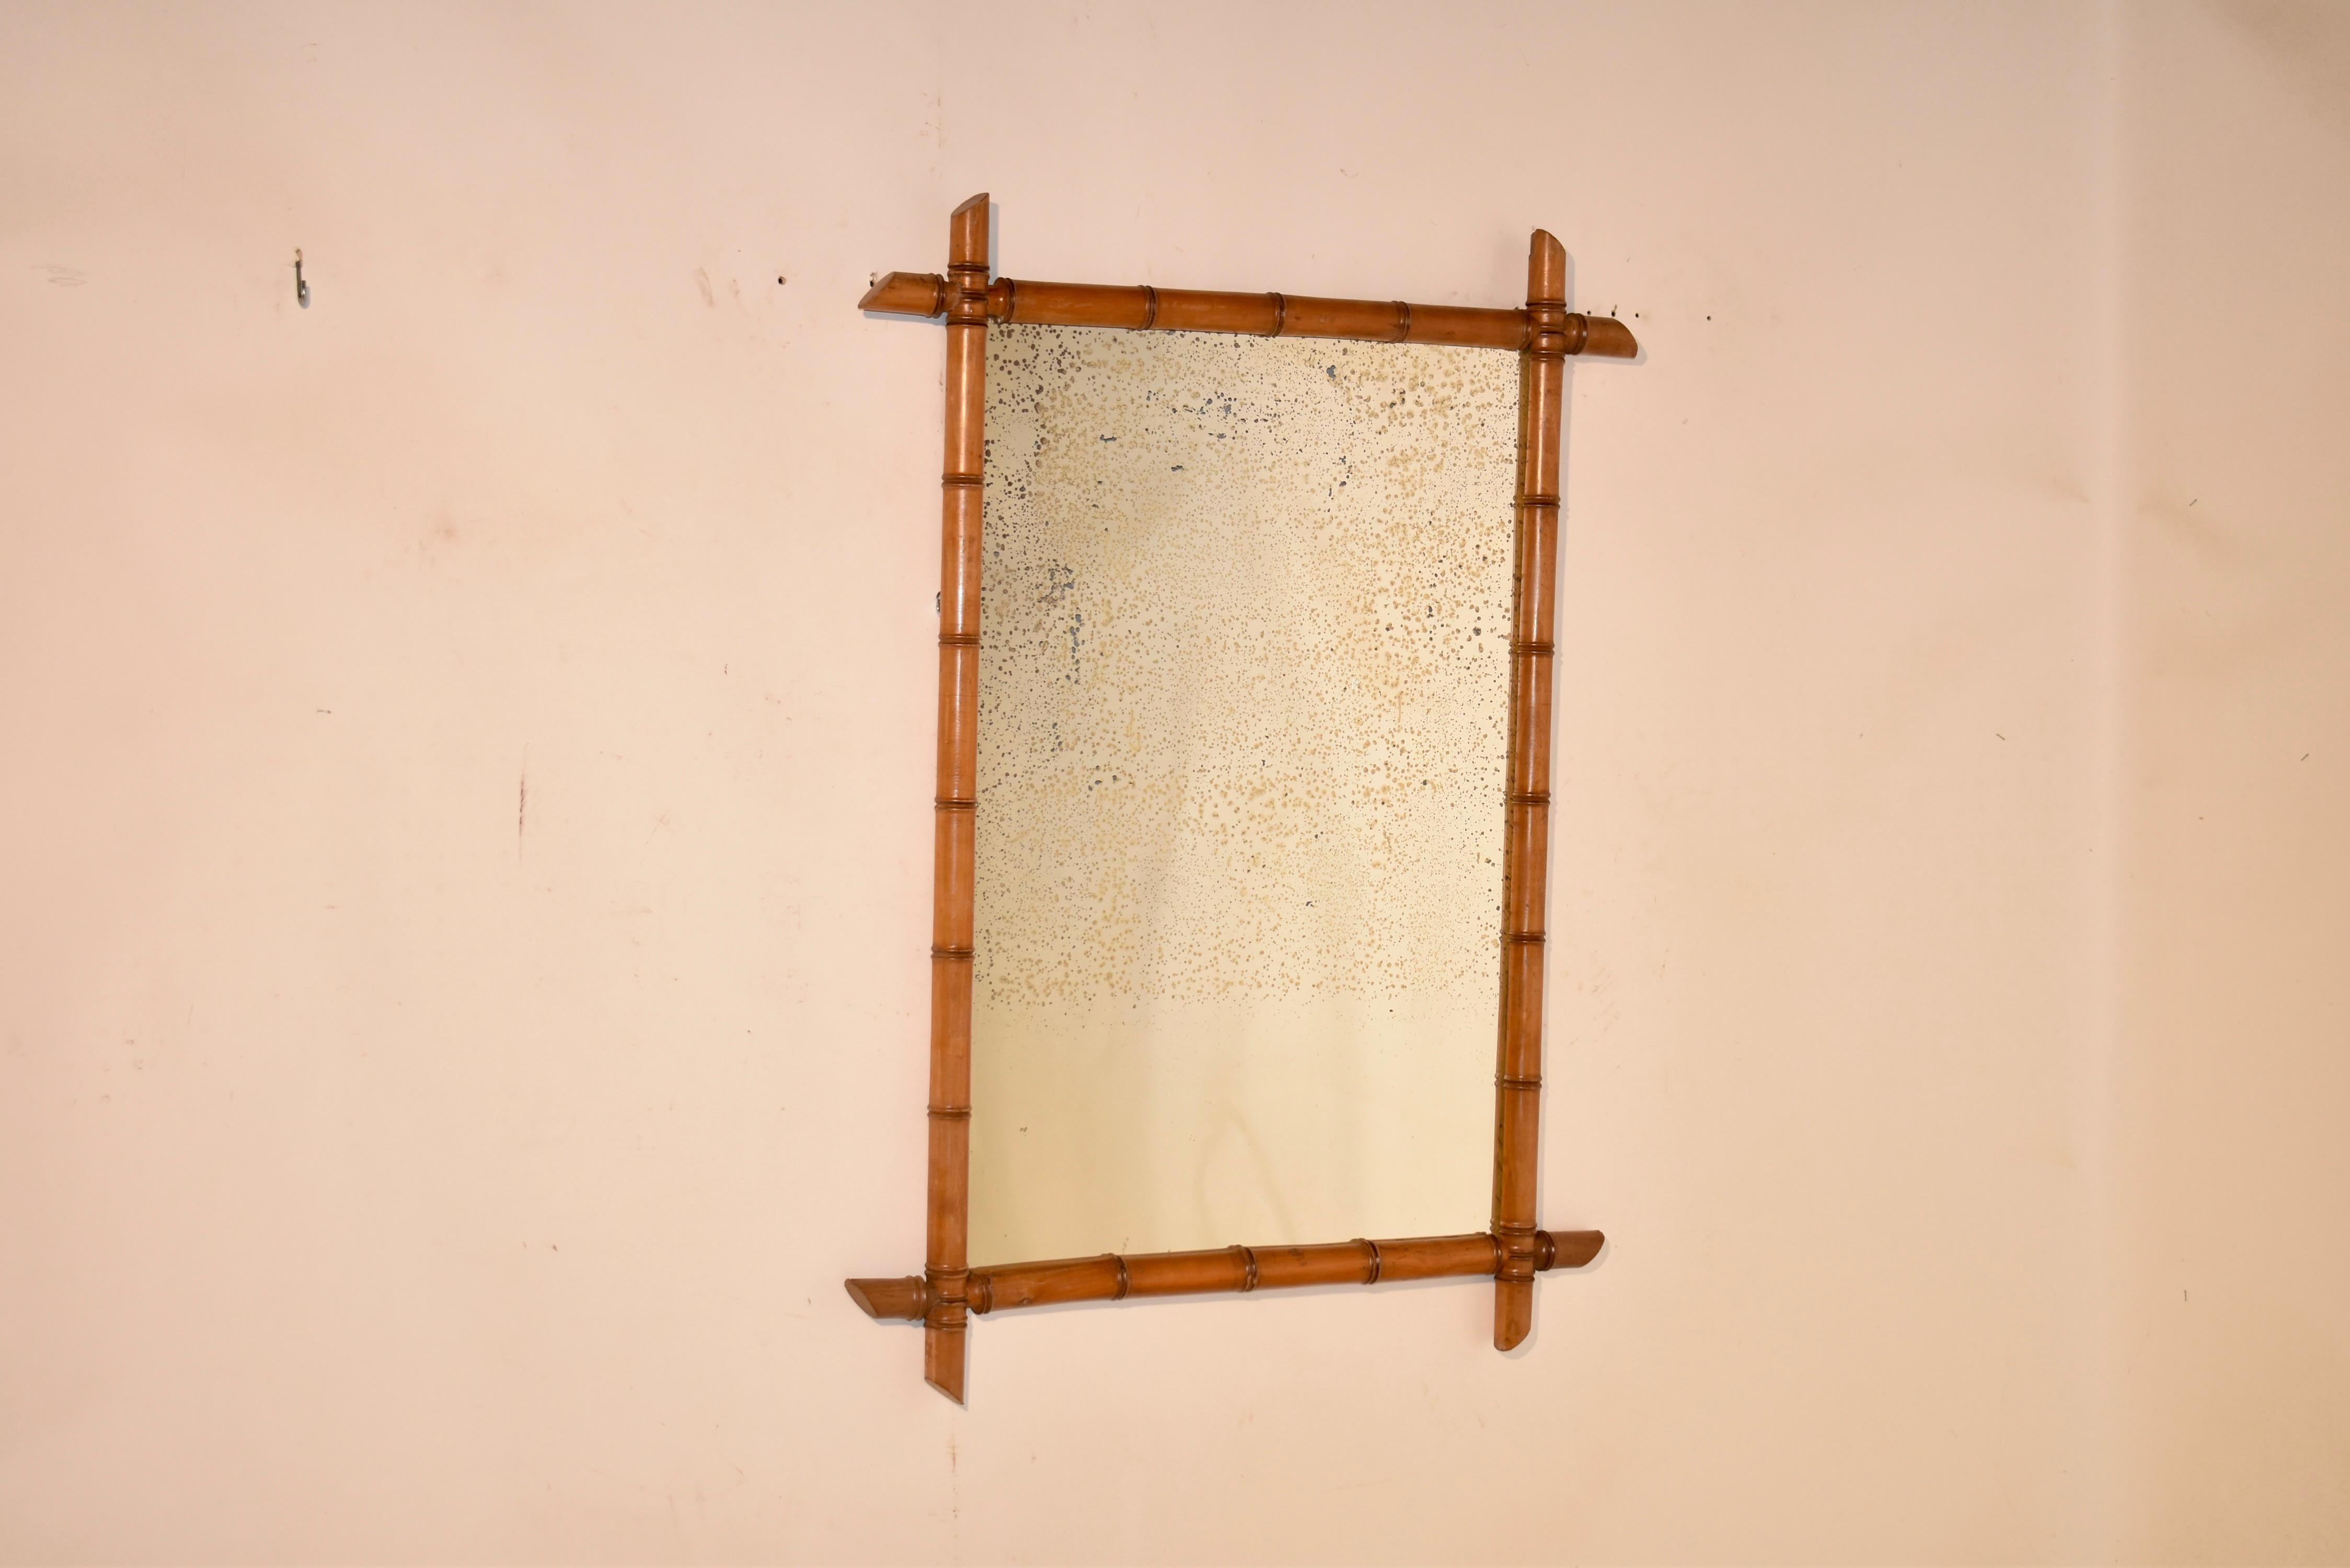 19th century faux bamboo mirror from France.  The frame has been wonderfully hand turned from cherry to look like bamboo.  The frame surrounds what appears to be the original mercury glass mirror.  These mirrors are wonderful for adding depth and